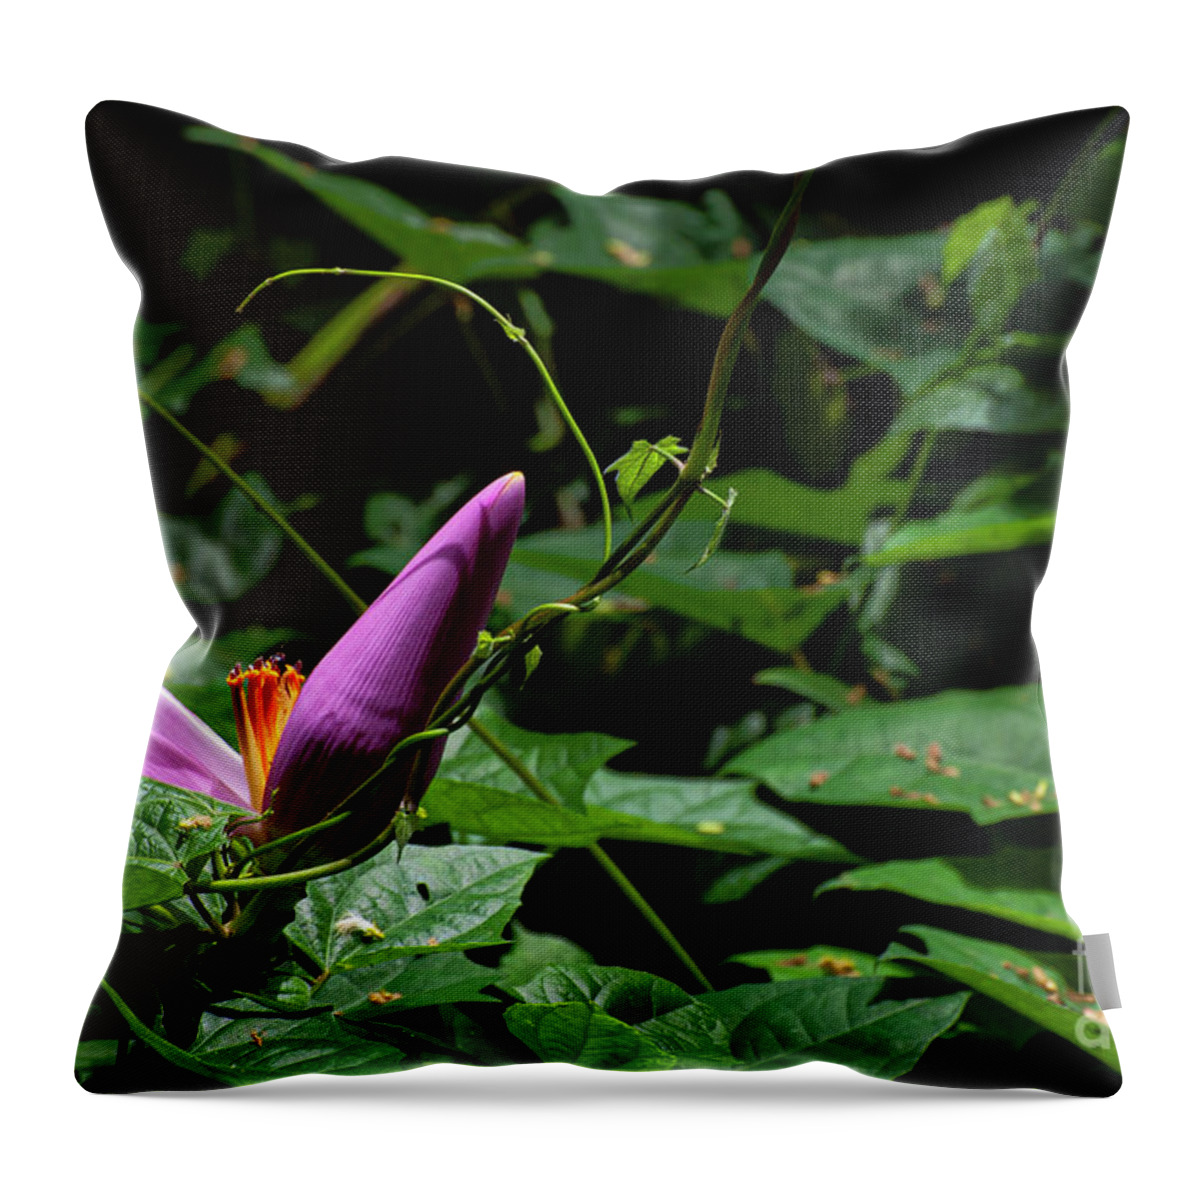 South Shore Coast Throw Pillow featuring the photograph Hairy Banana Flower by Bob Phillips